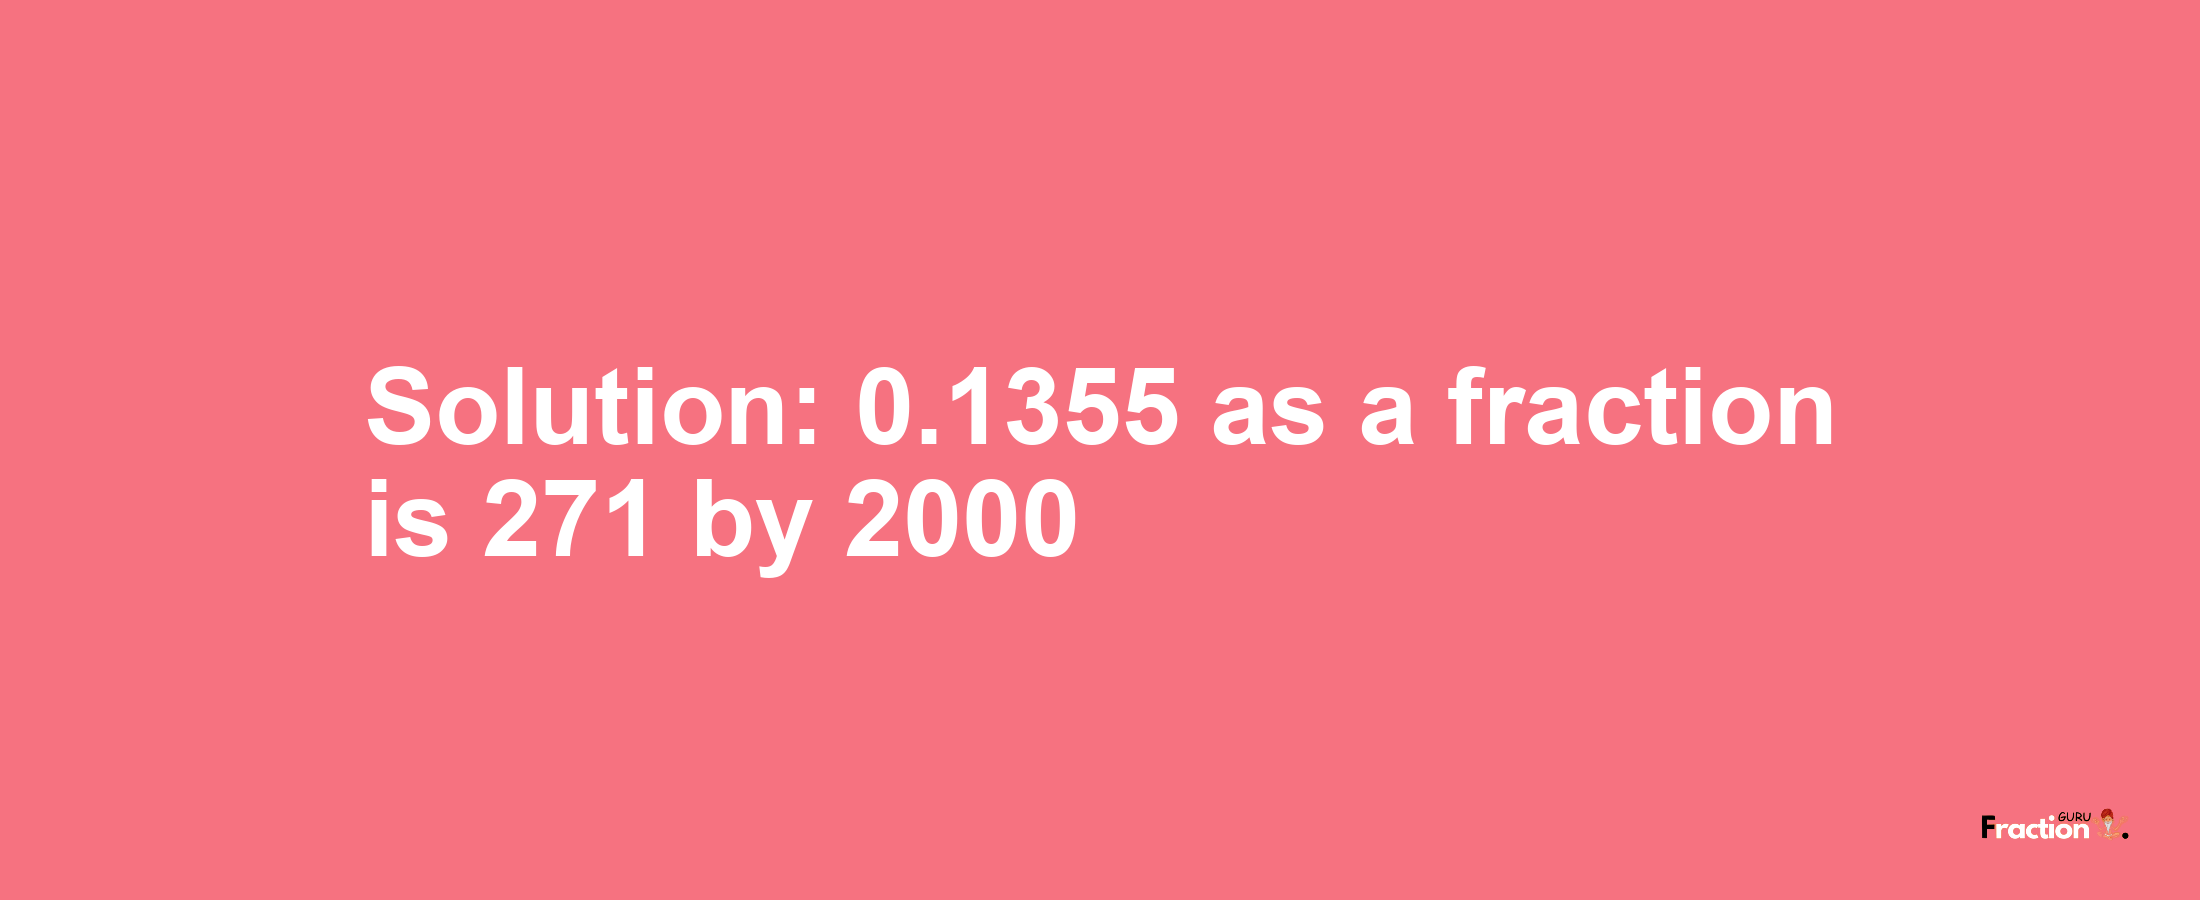 Solution:0.1355 as a fraction is 271/2000